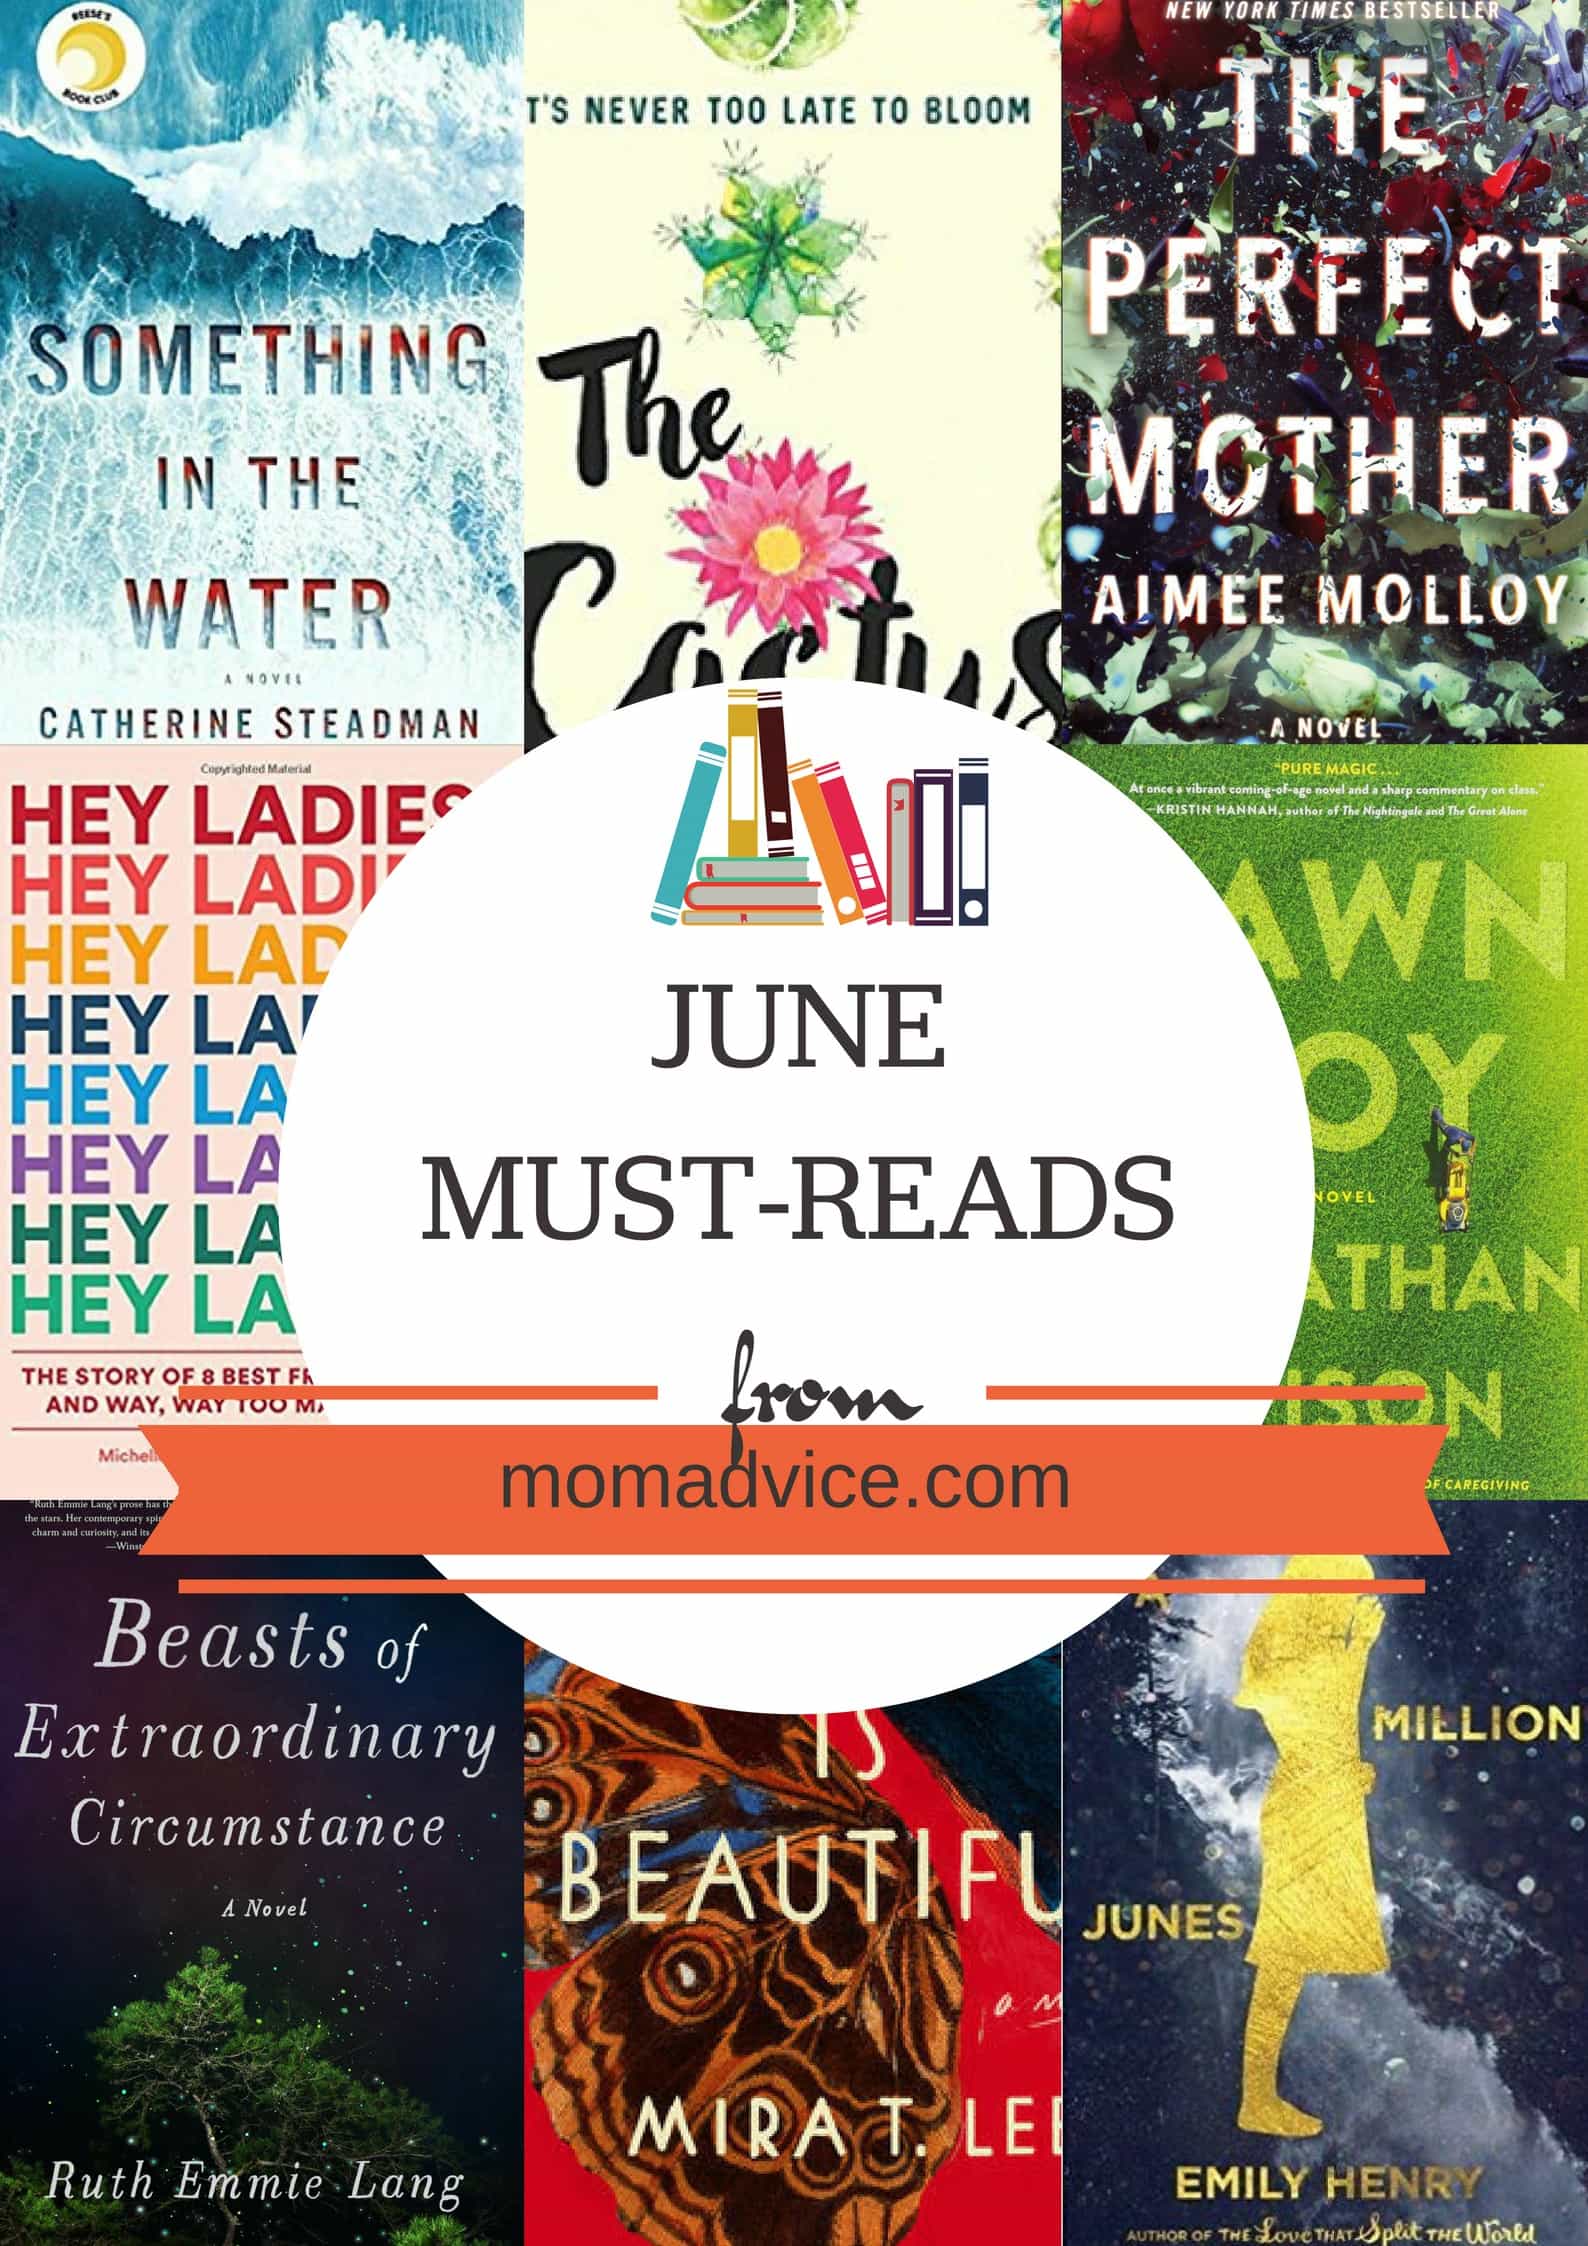 June 2018 Must-Reads from MomAdvice.com